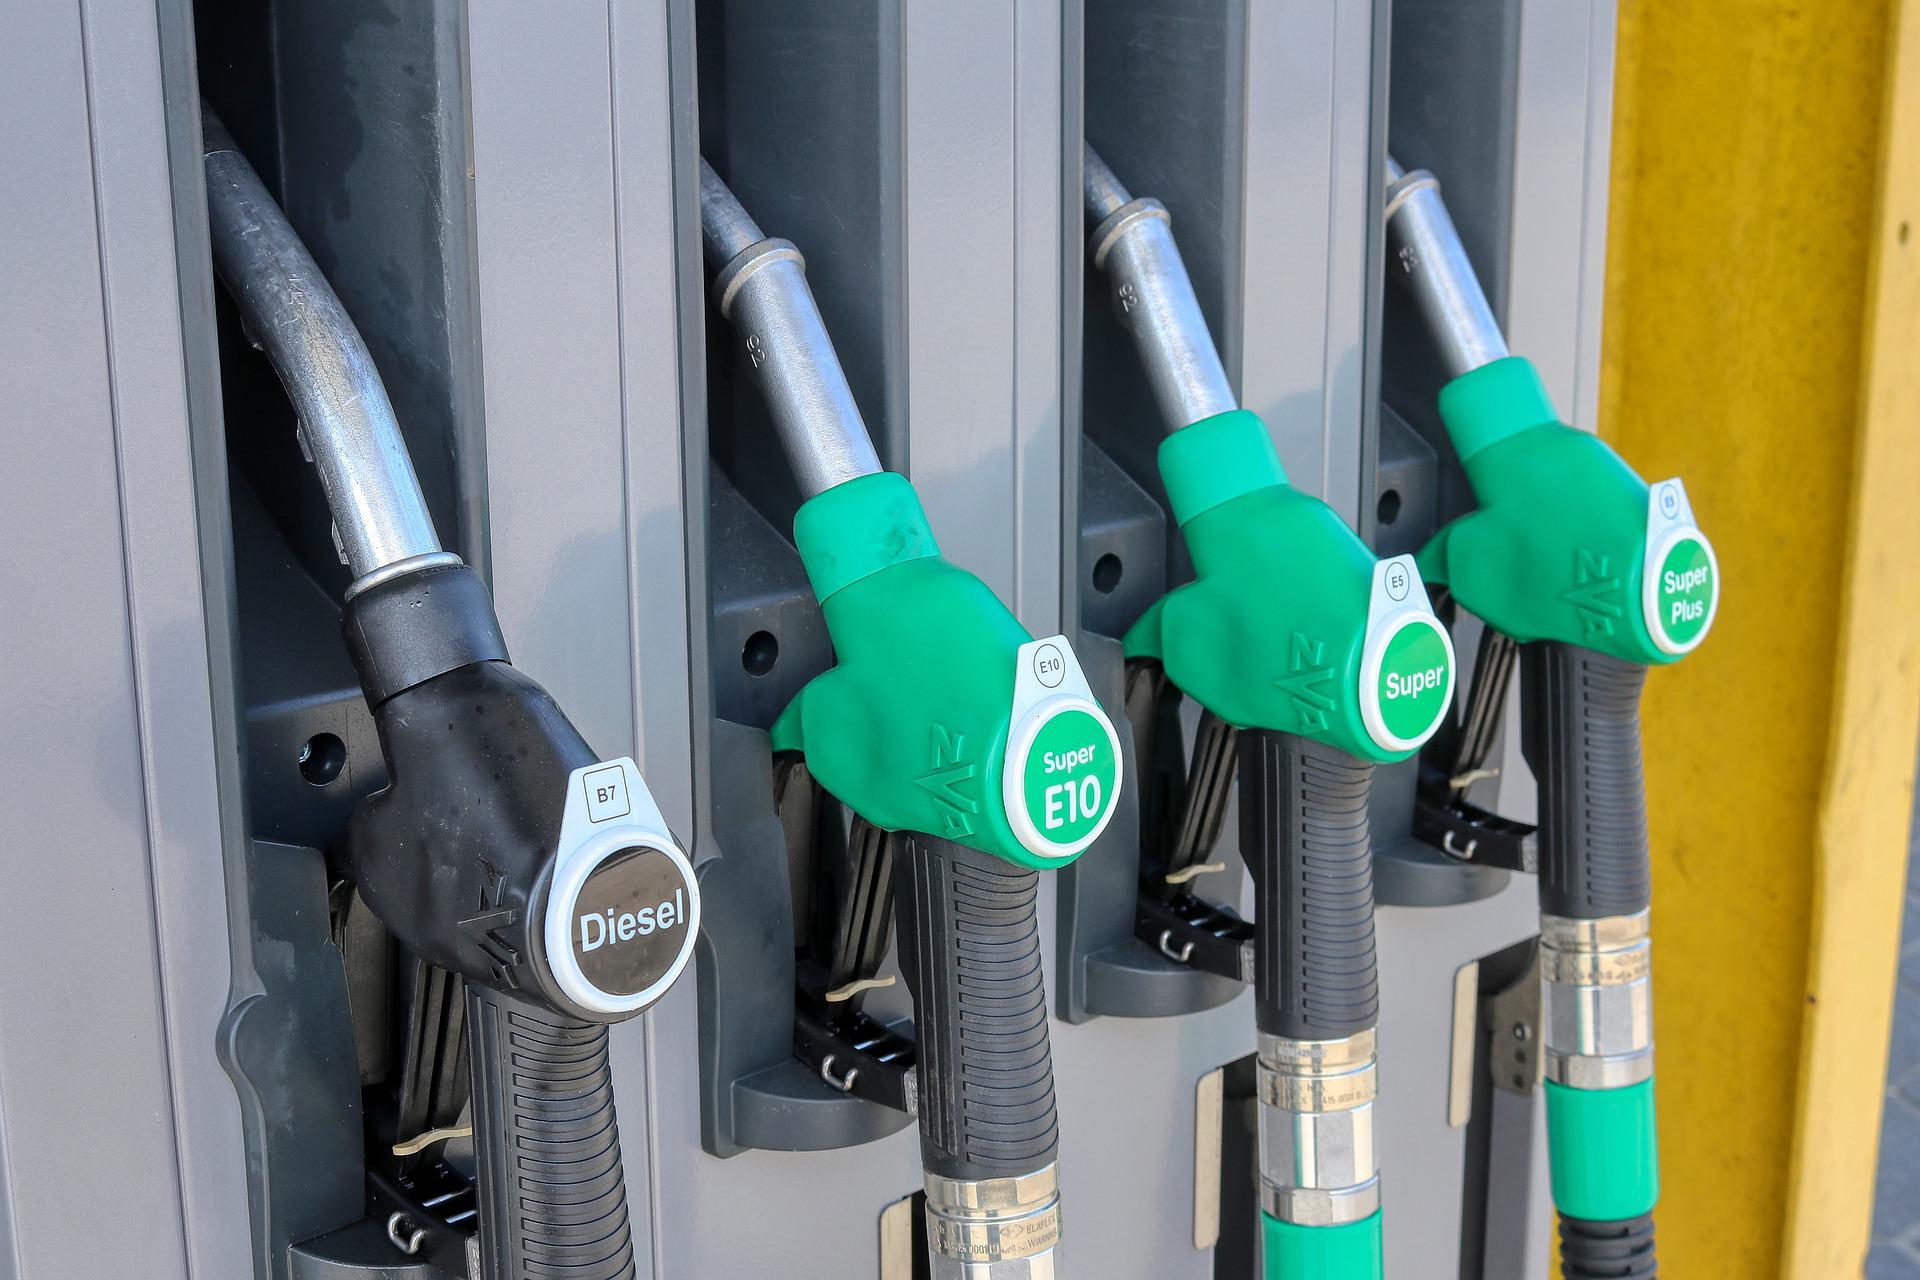 Another (sizeable) fuel price rollback is set for next week; Diesel to drop by 1.70 to 1.90 and Gasoline 4.70 to 4.90